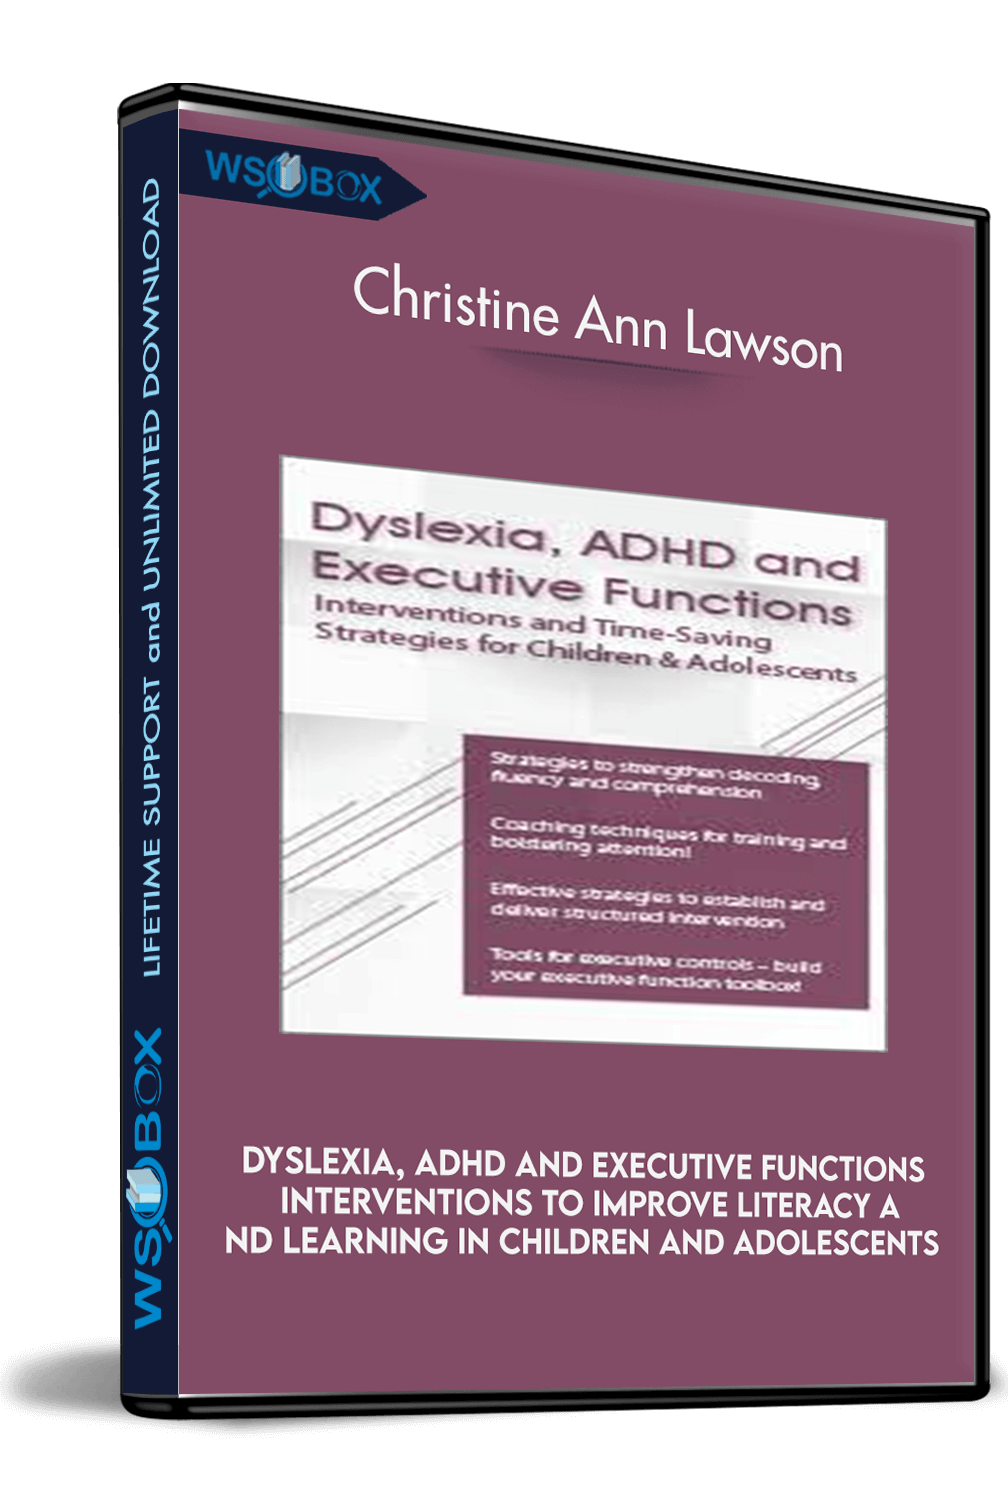 dyslexia-adhd-and-executive-functions-interventions-to-improve-literacy-and-learning-in-children-and-adolescents-paula-moraine